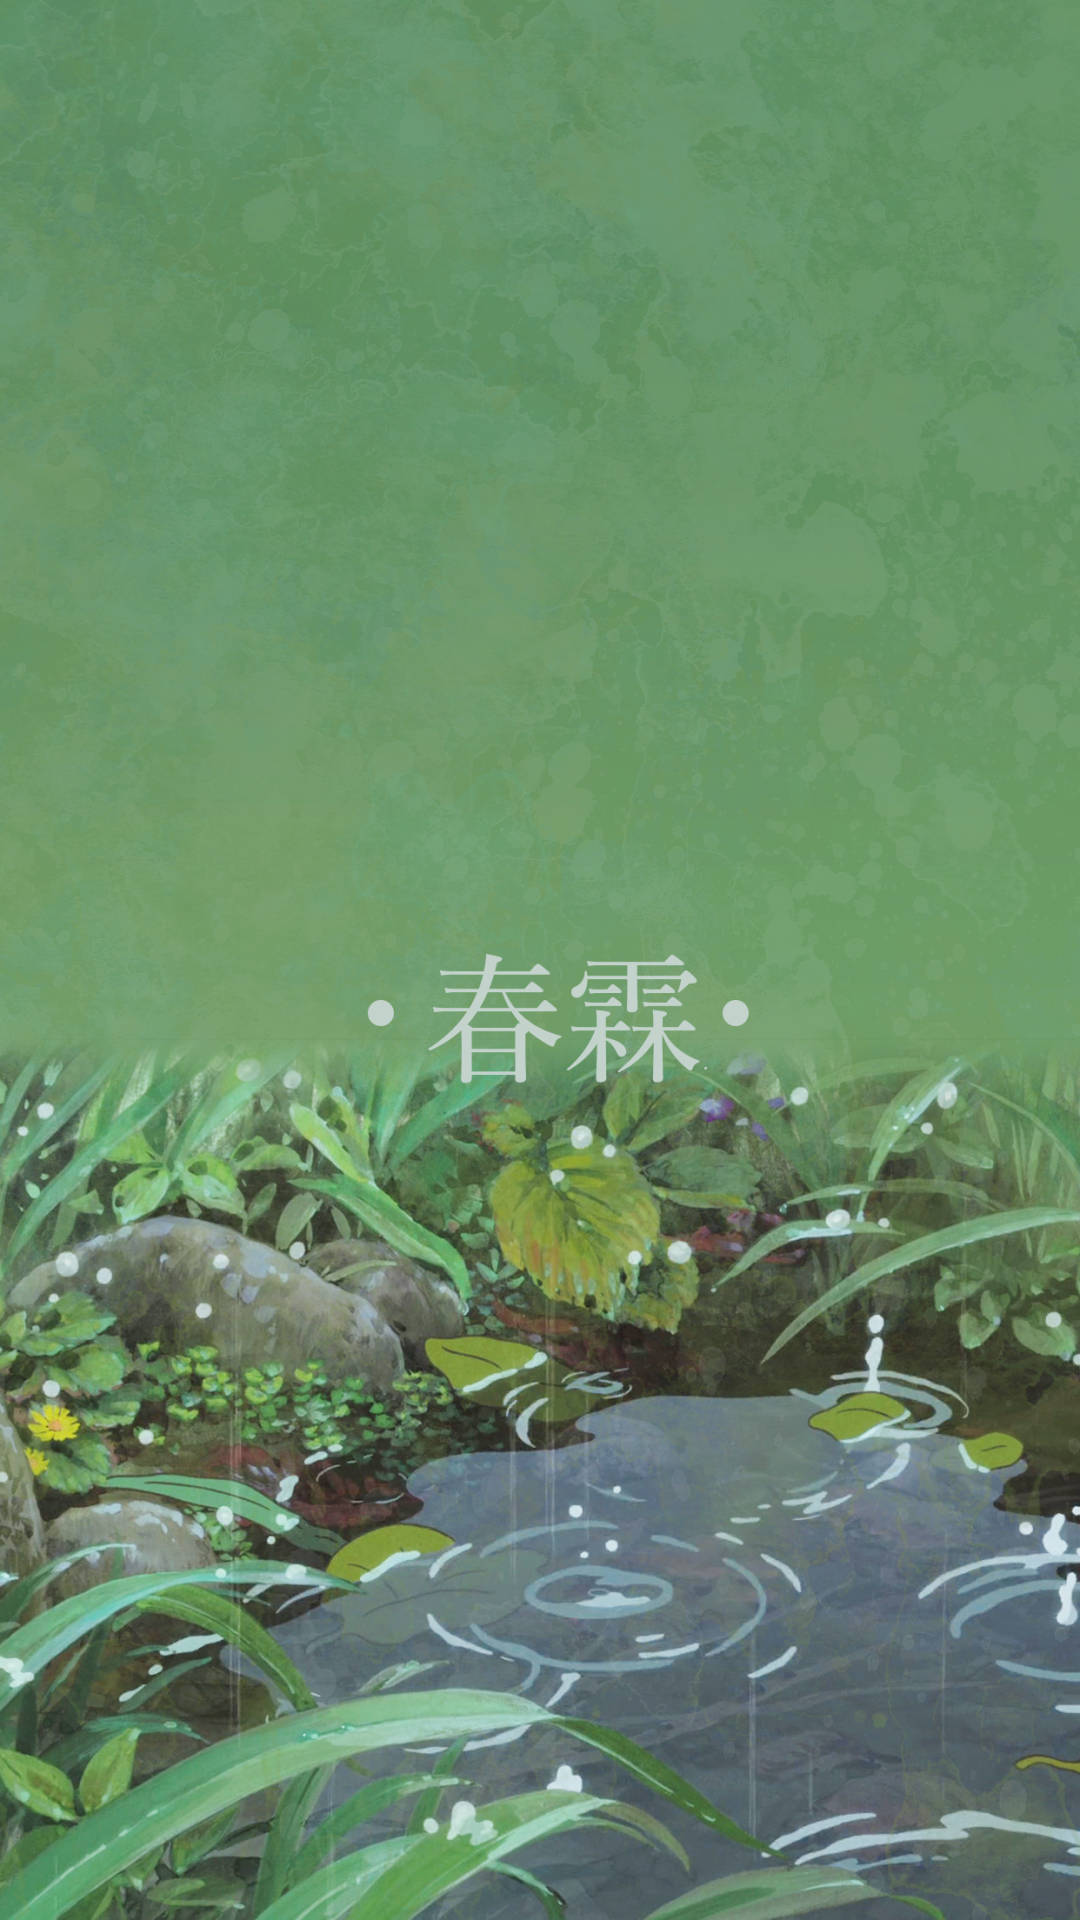 Small Pond In The Rain Green Anime Aesthetic Wallpaper